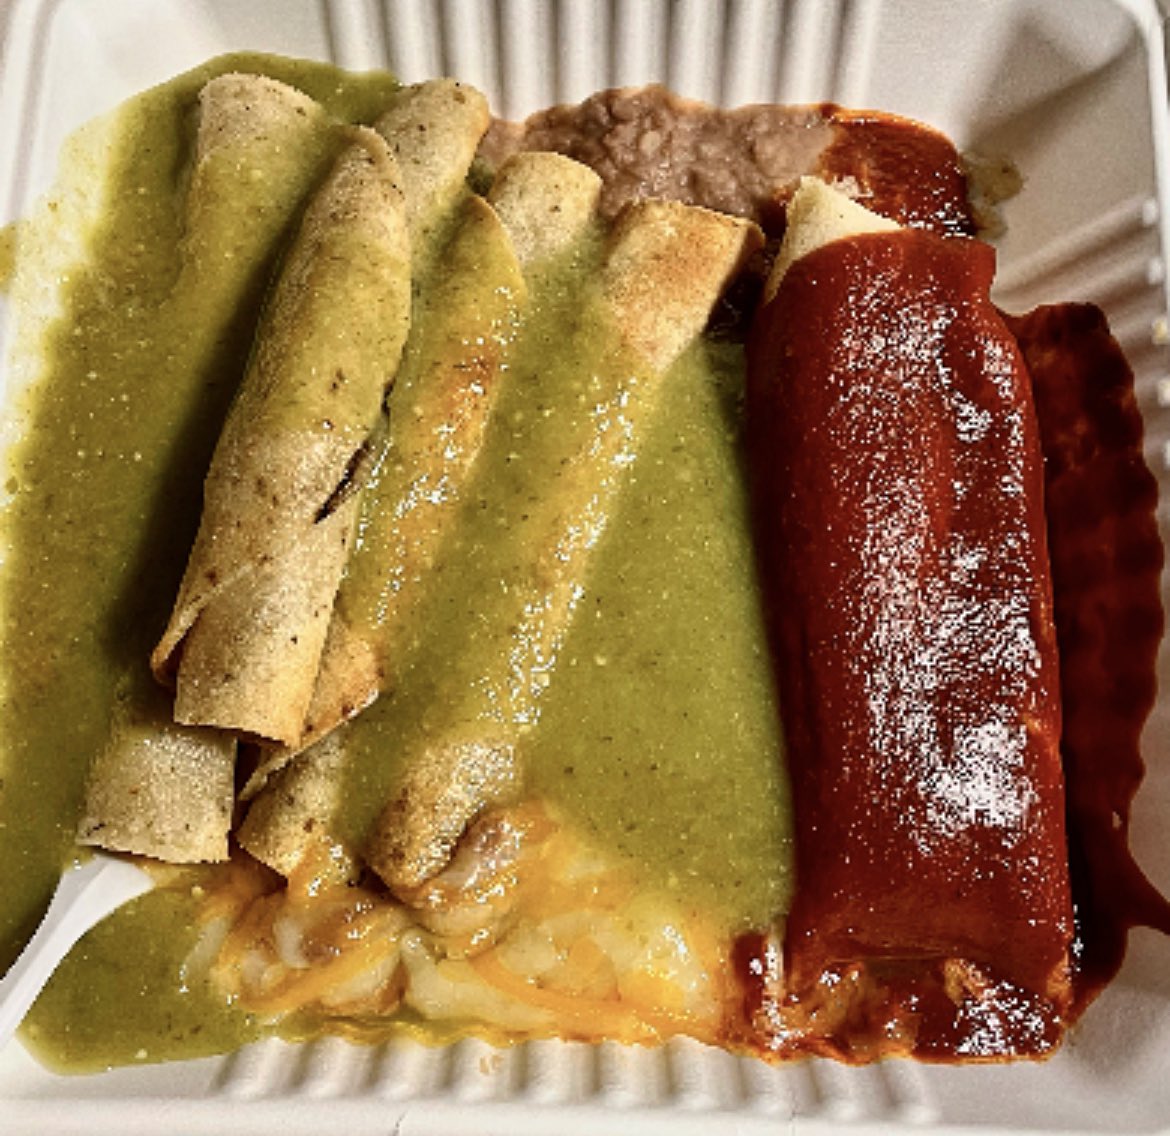 A Rolled Taco Tuesday!

4 Taquitos, a Tamale, and some Refried Beans spent a Tuesday together…

From Cielito Lindo in #DTLA.

#tacotuesday #taquitos #olverastreet #inthe213